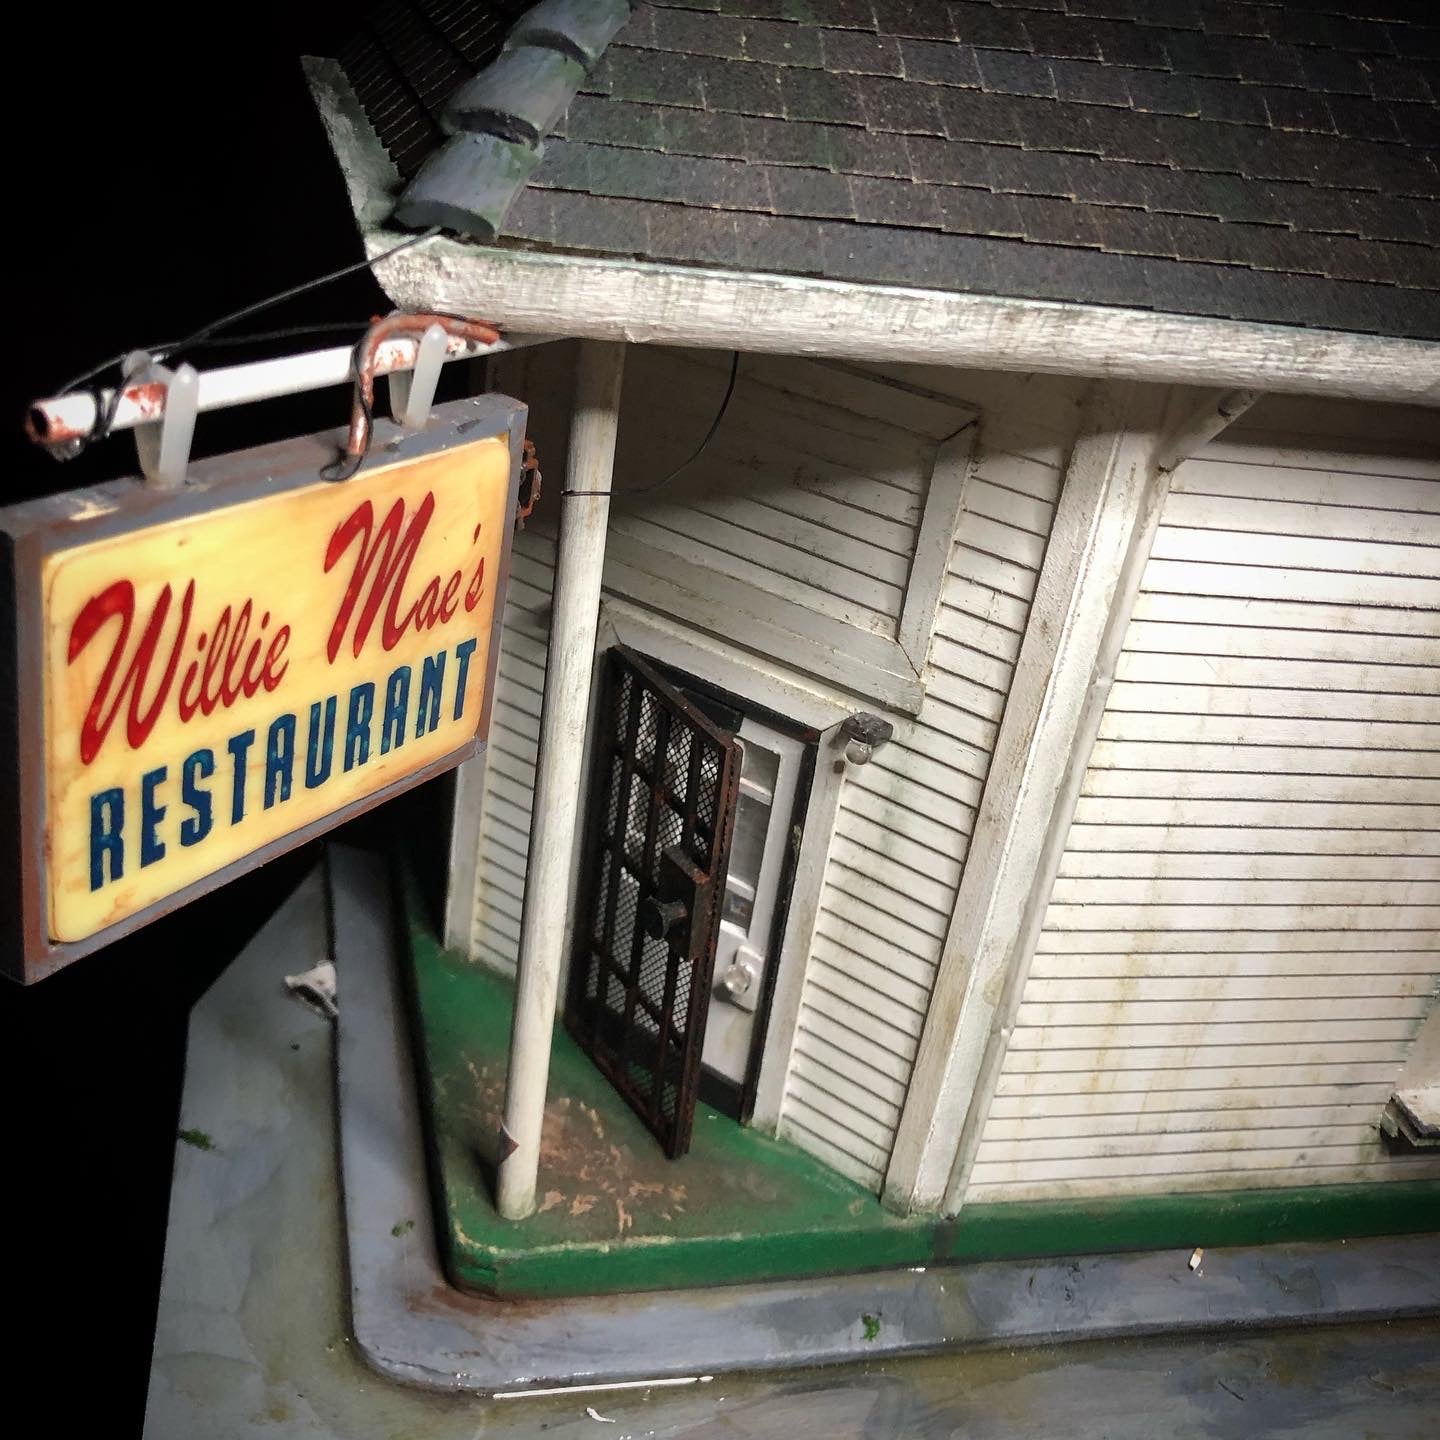 Another photo of Willie Mae's miniature model, this photo shows the front door from the front at an elevated angle looking down, there is a metal security door and the door is slightly ajar.